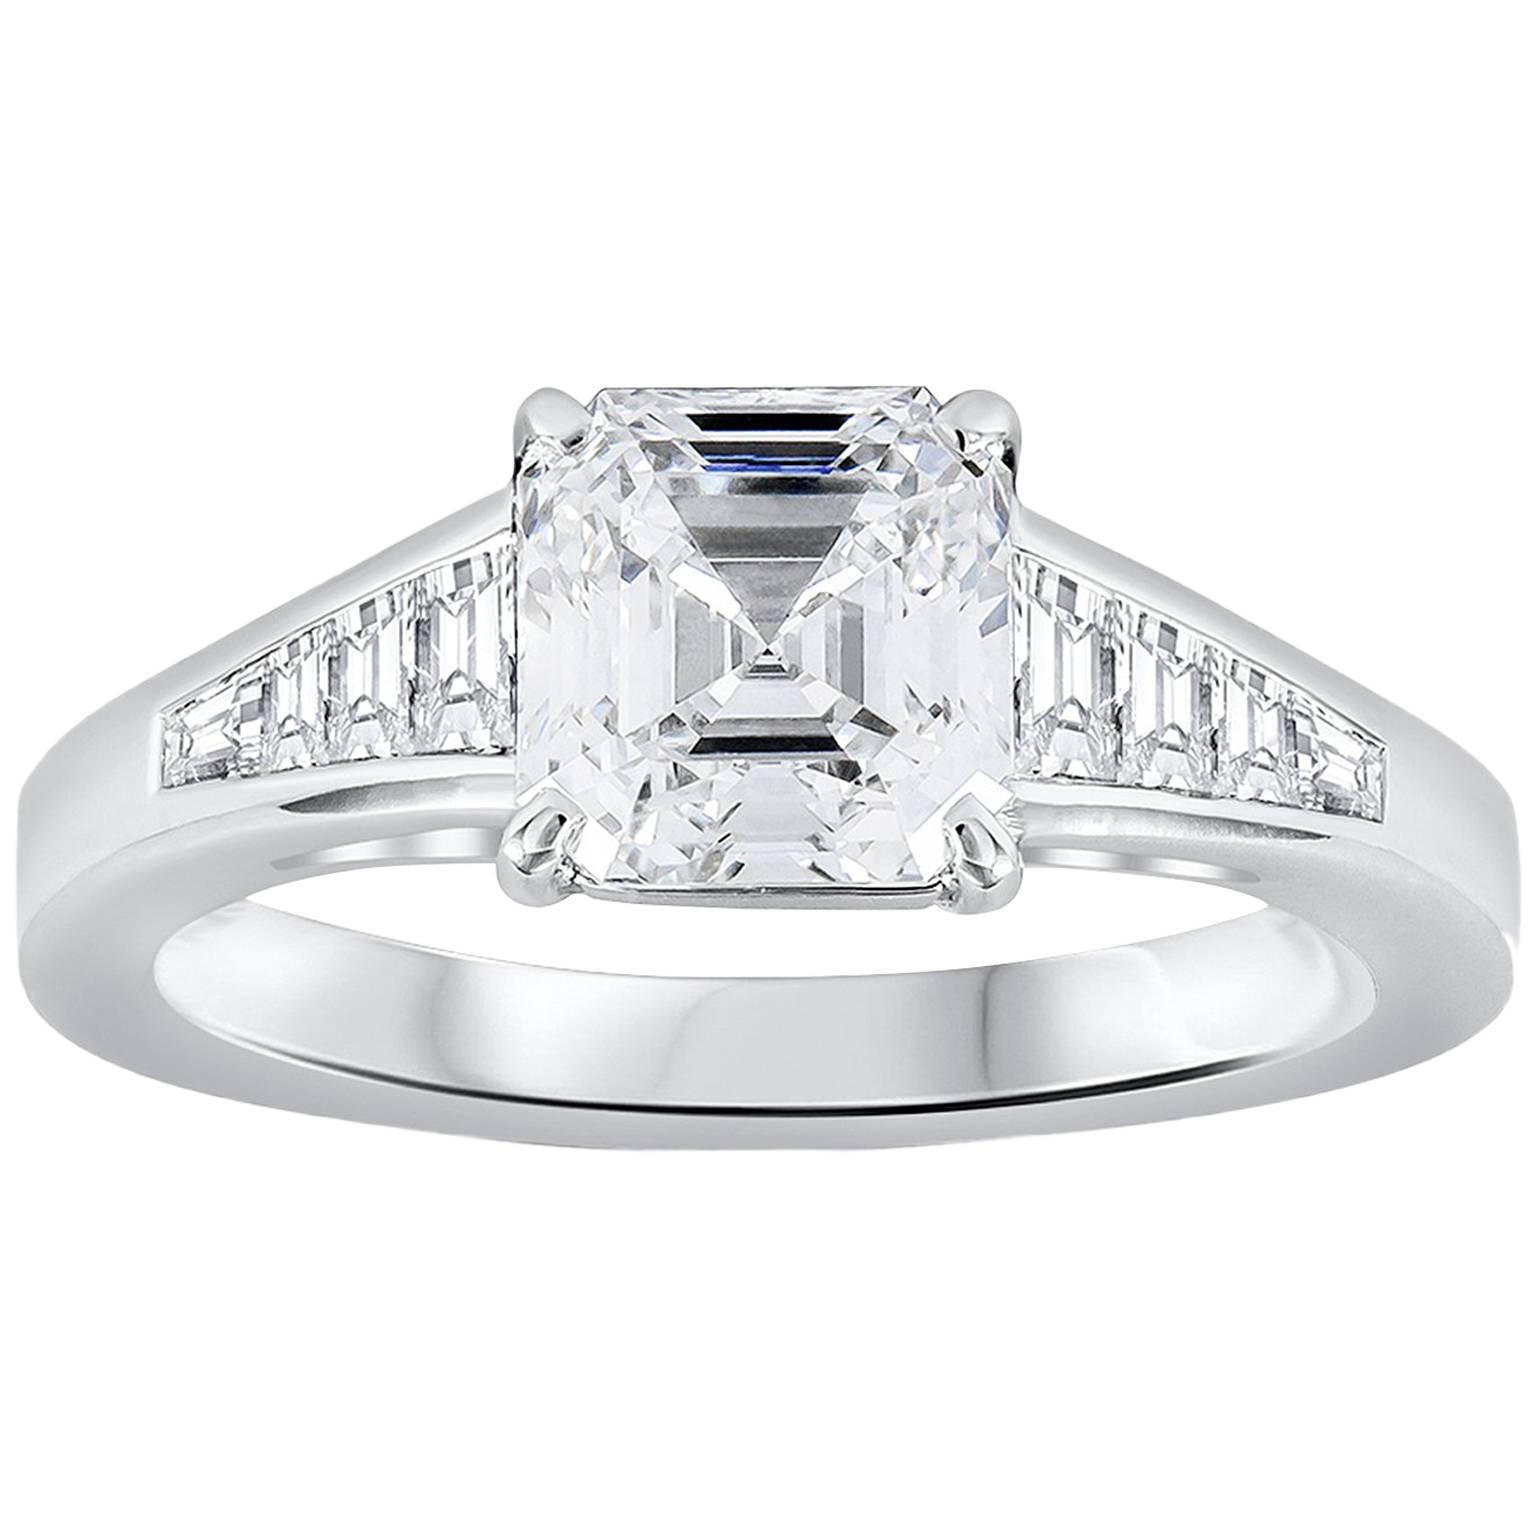 Features a 1.56 carats asscher cut diamond that GIA certified as E color, VS1 in clarity. Flanking the center diamond are 0.40 carats of baguette diamonds channel set in a polished platinum composition. A magnificent piece of jewelry. Size 5.5 US